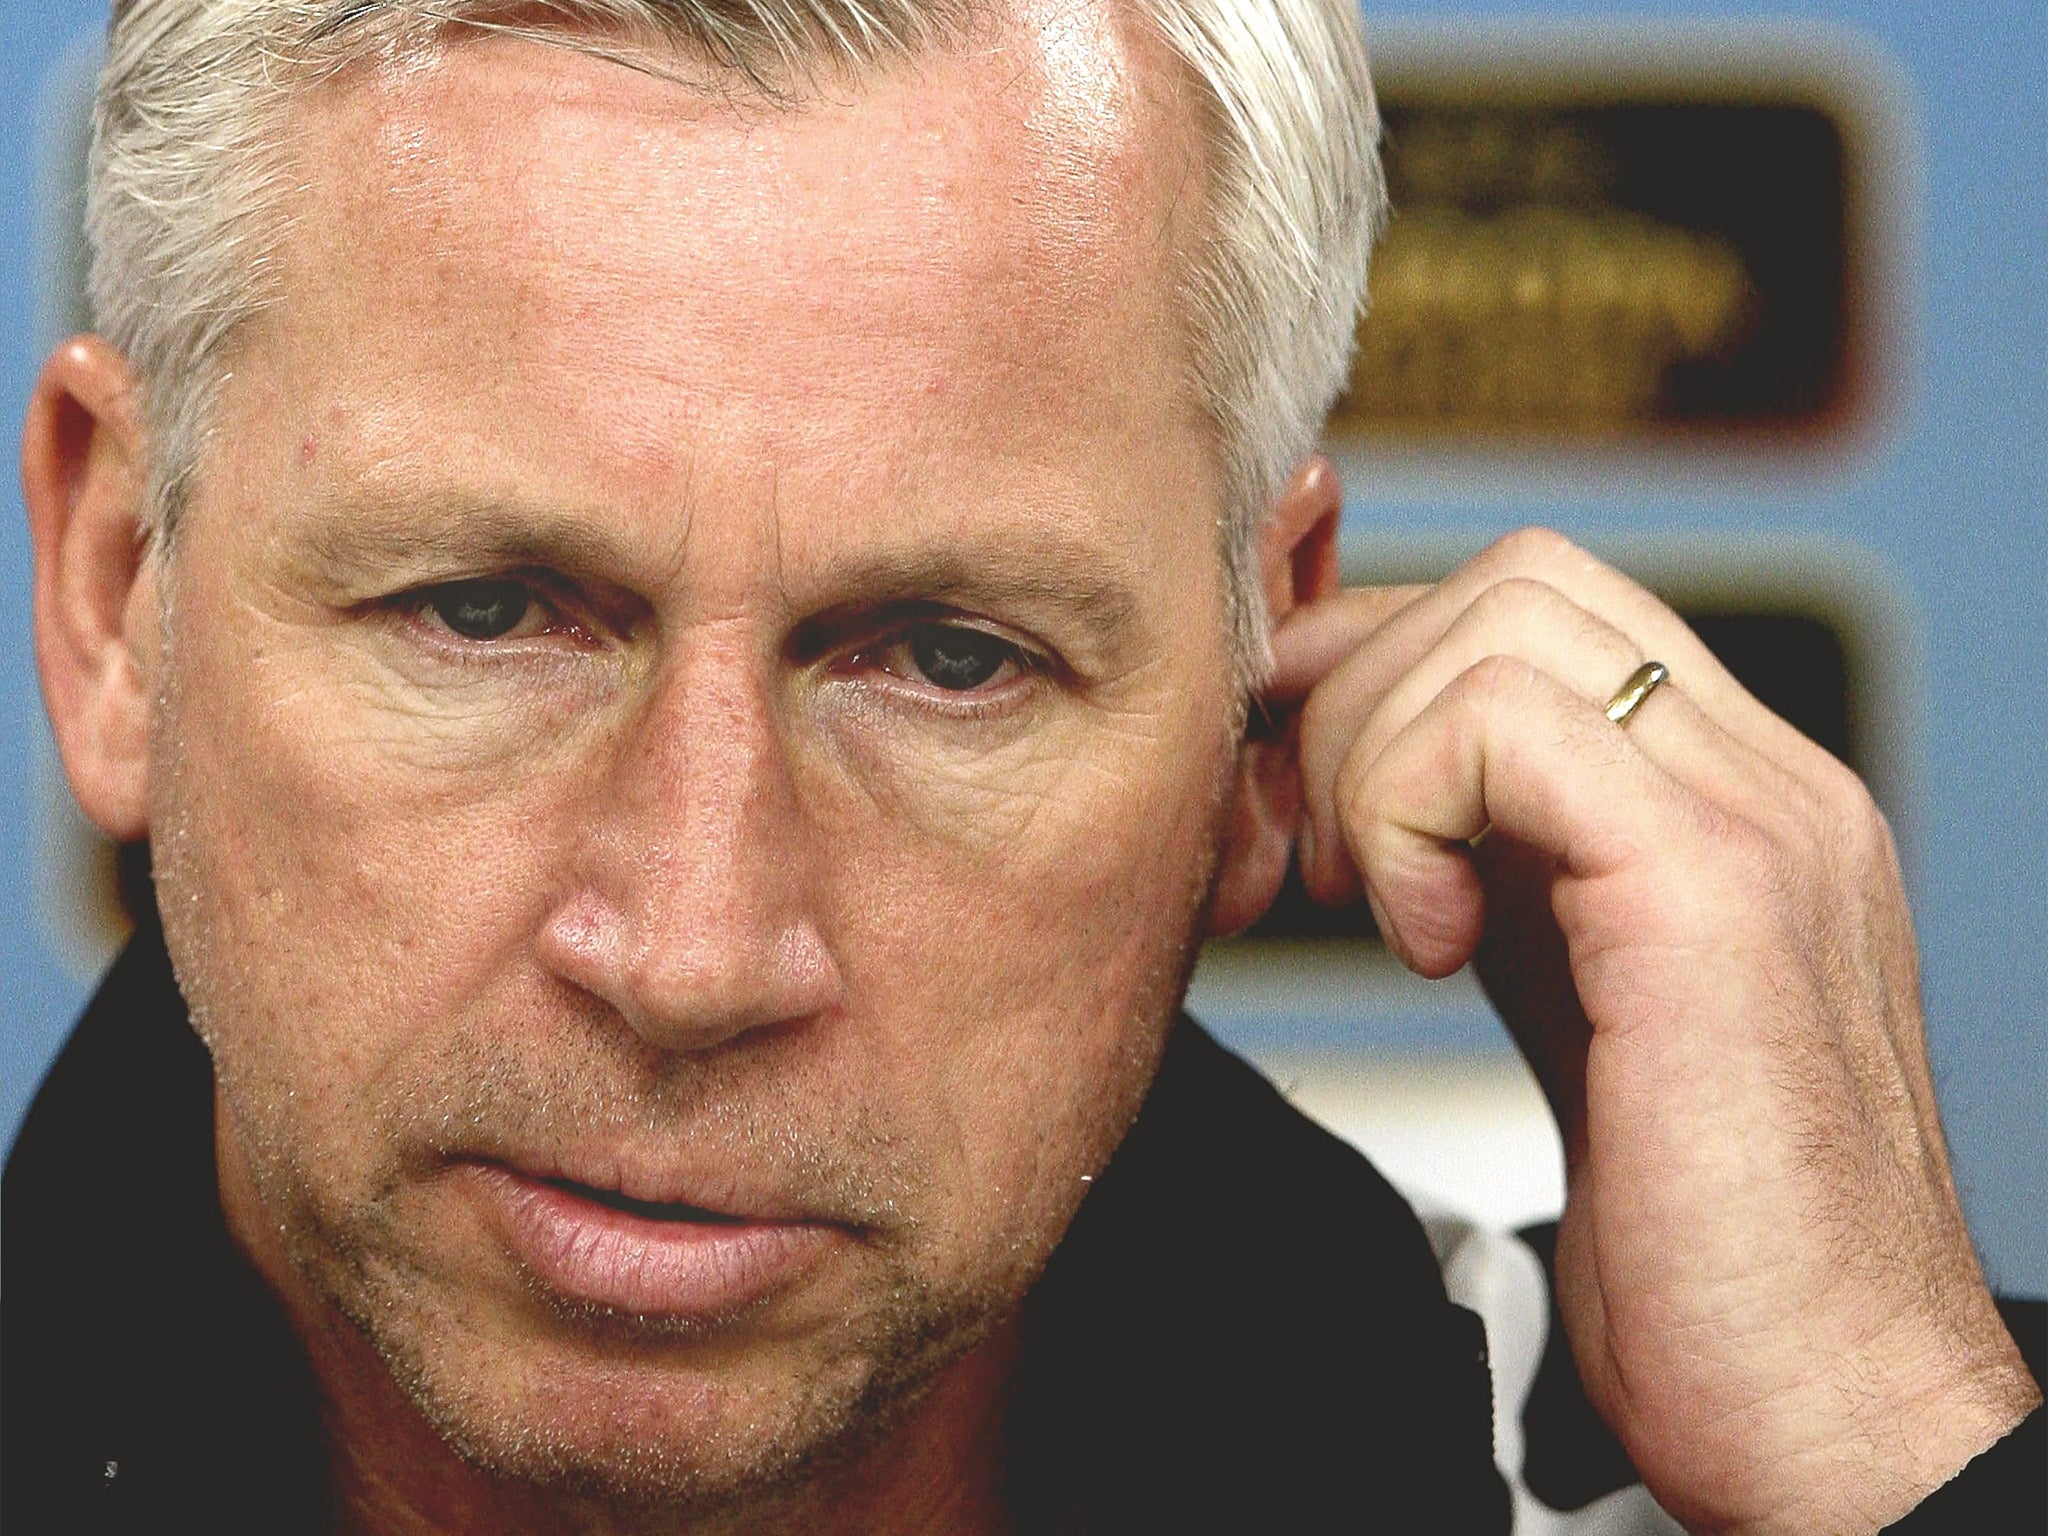 Alan Pardew said there are no mission impossibles in football